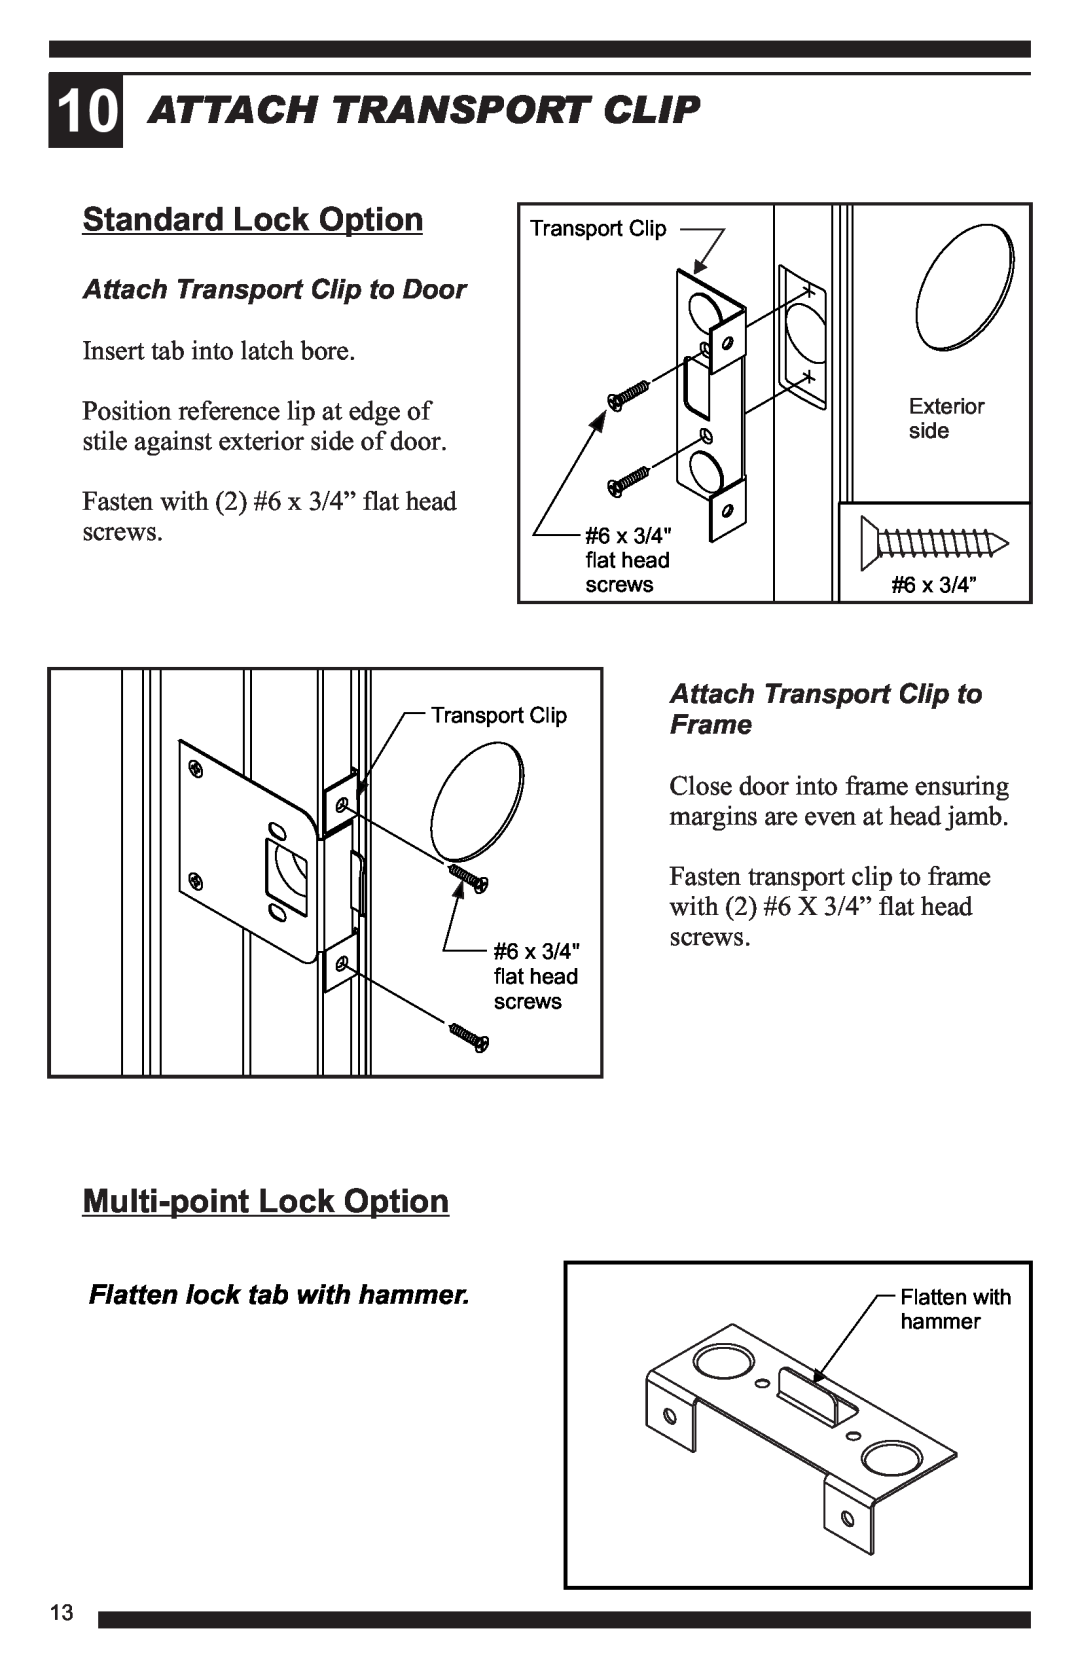 Therma-Tru Hinged Patio Door System Single Panel Assembly Unit manual Attach Transport Clip, Standard Lock Option 